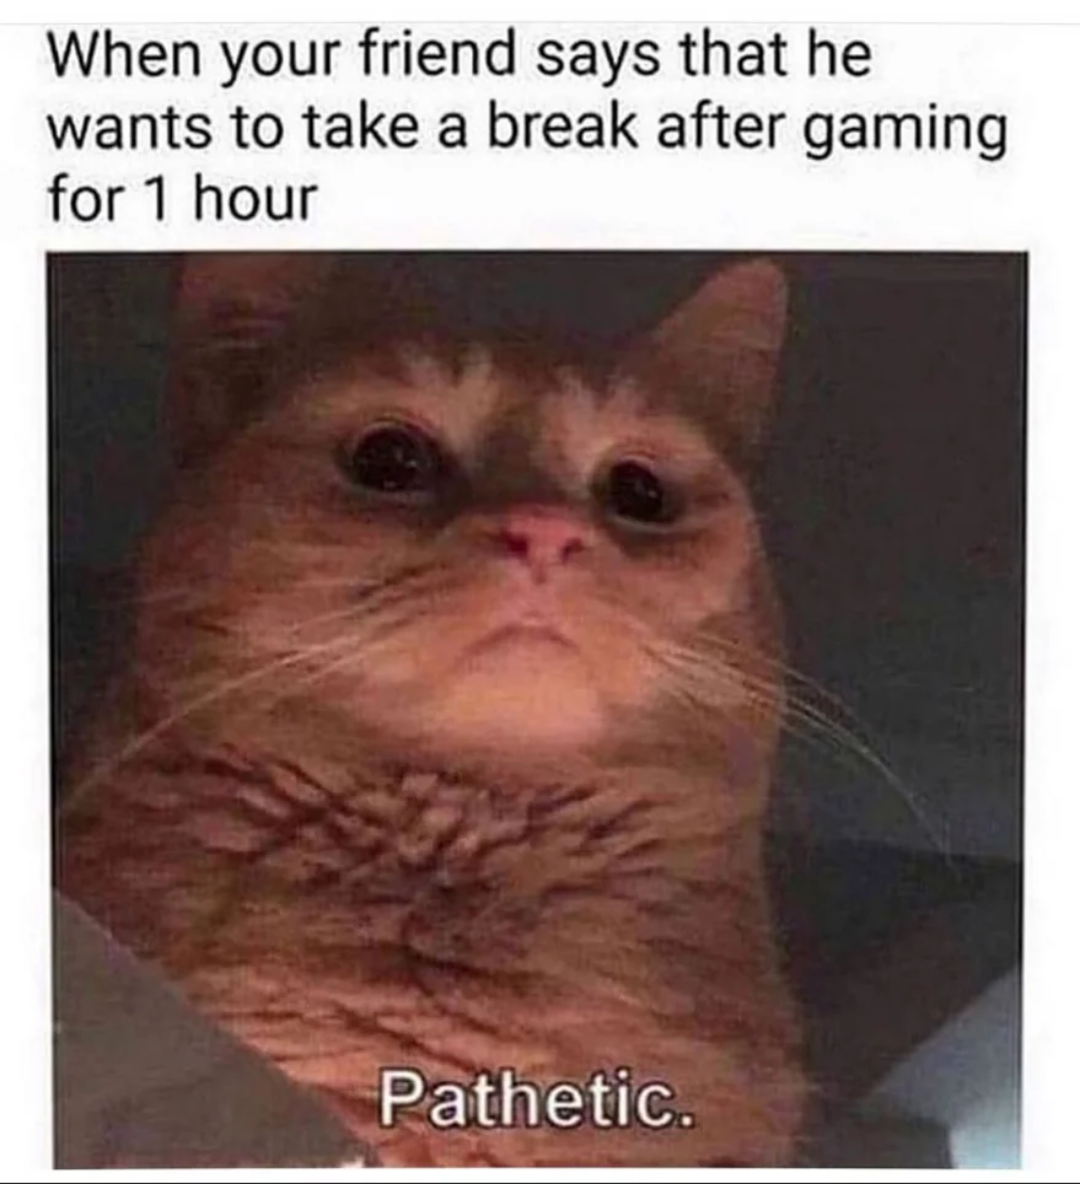 dank memes funny jokes - Funny meme - When your friend says that he wants to take a break after gaming for 1 hour Pathetic.